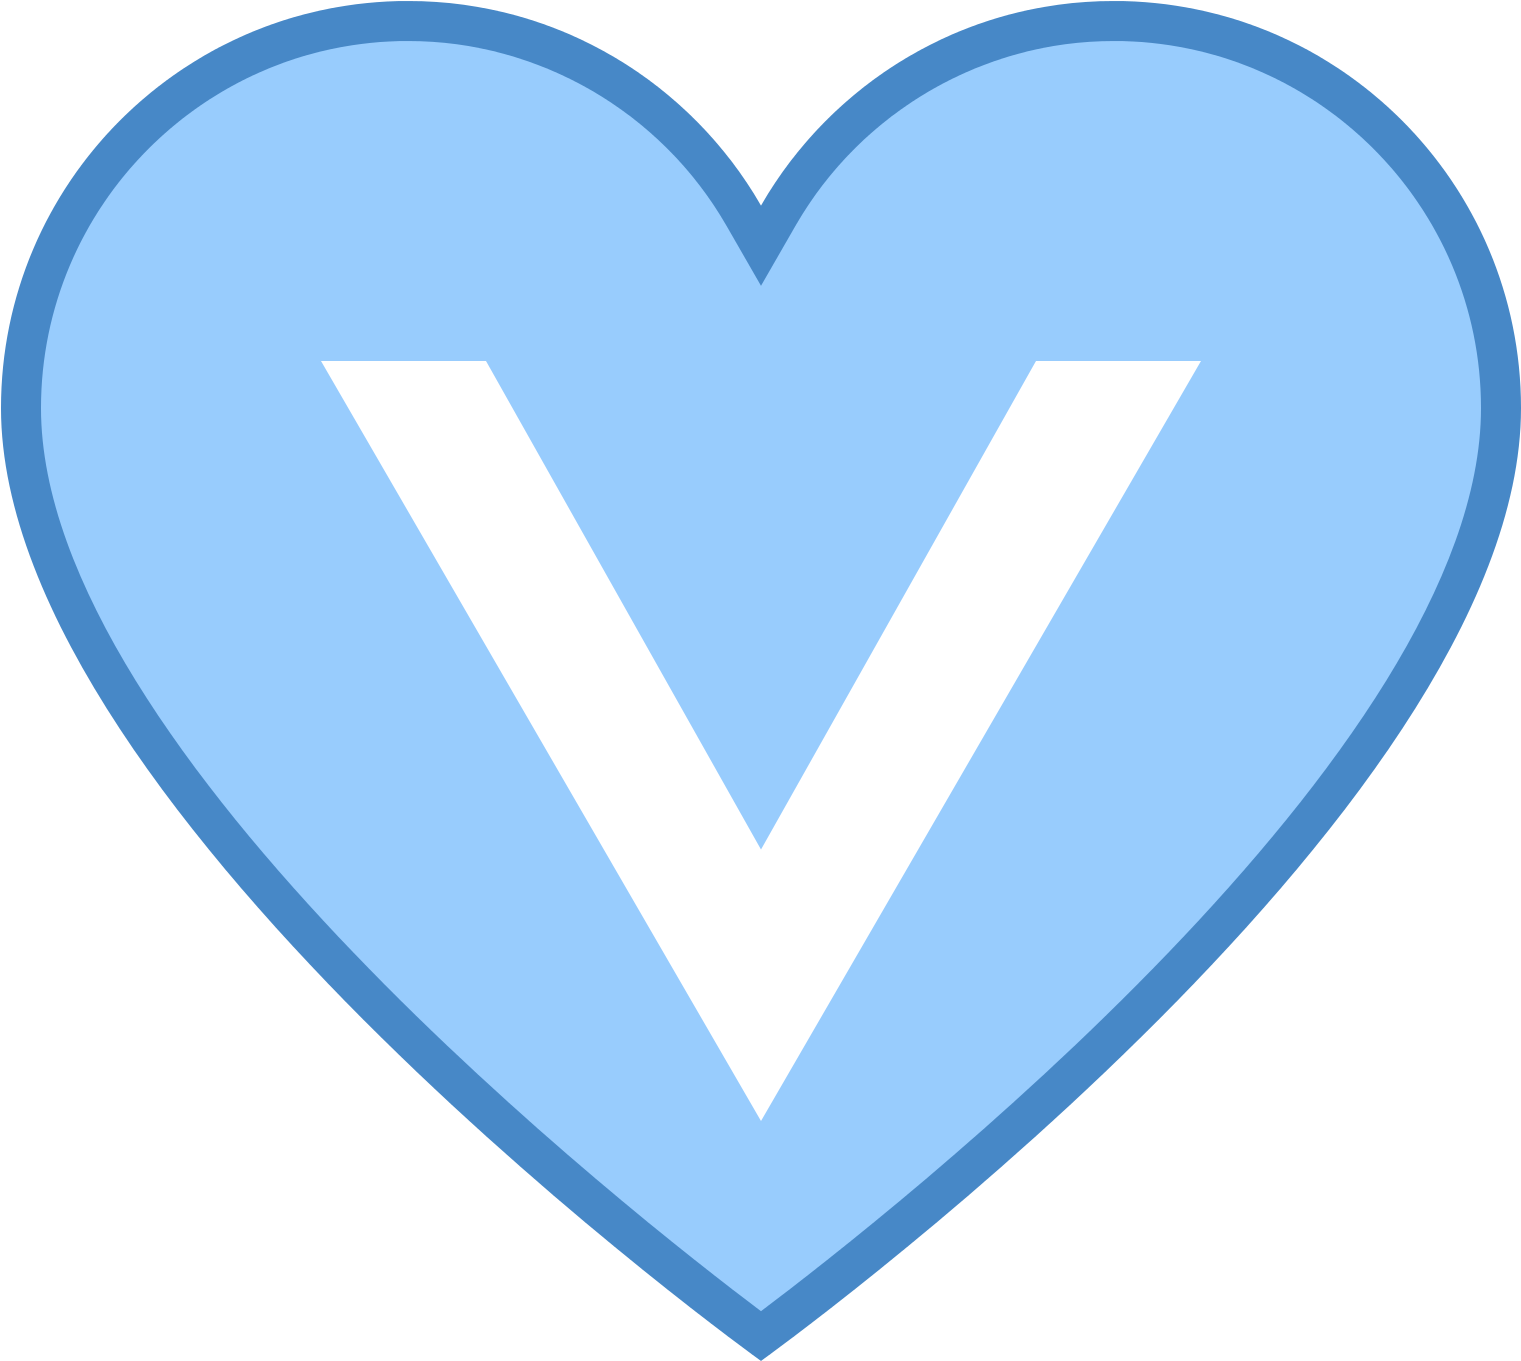 A Blue Heart With A White Letter V